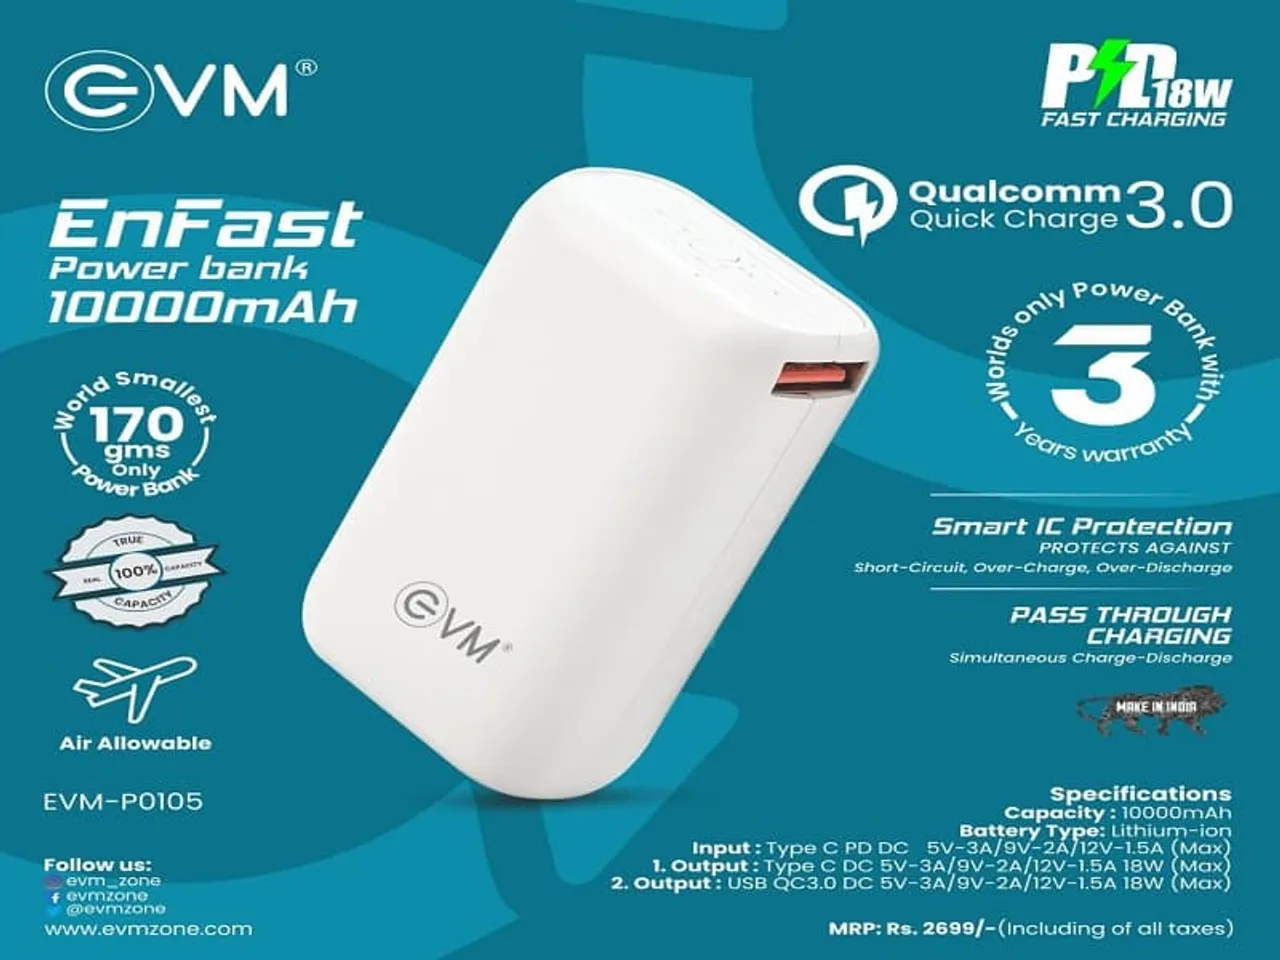 EVM Introduces 100% Locally-Made Compact 10,000mAh Powerbank as a Make in India Effort